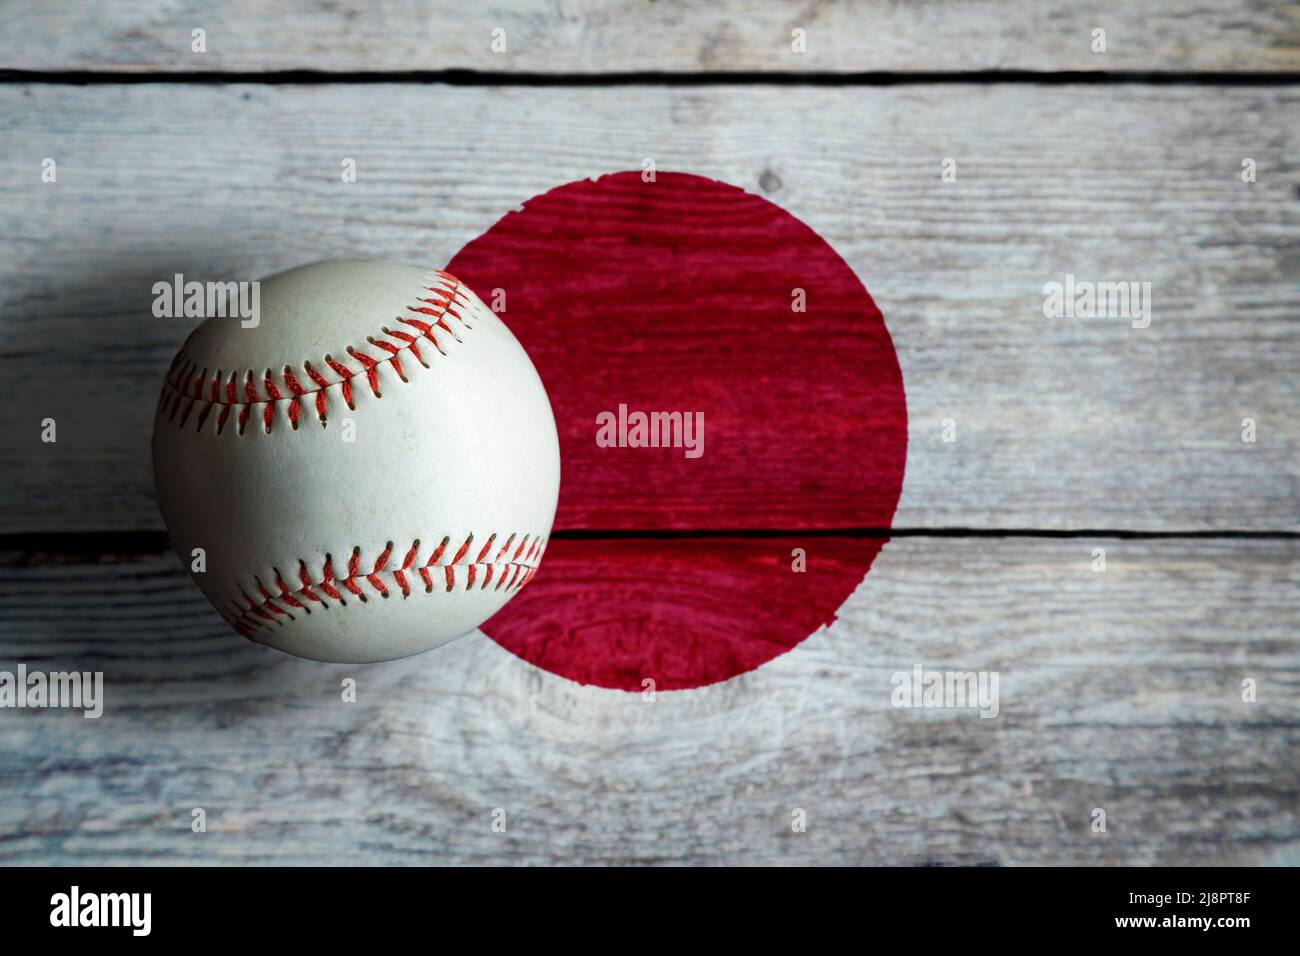 Leather baseball on rustic wooden background painted with Japanese flag with copy space. Japan is one of the top baseball nations in the world. Stock Photo